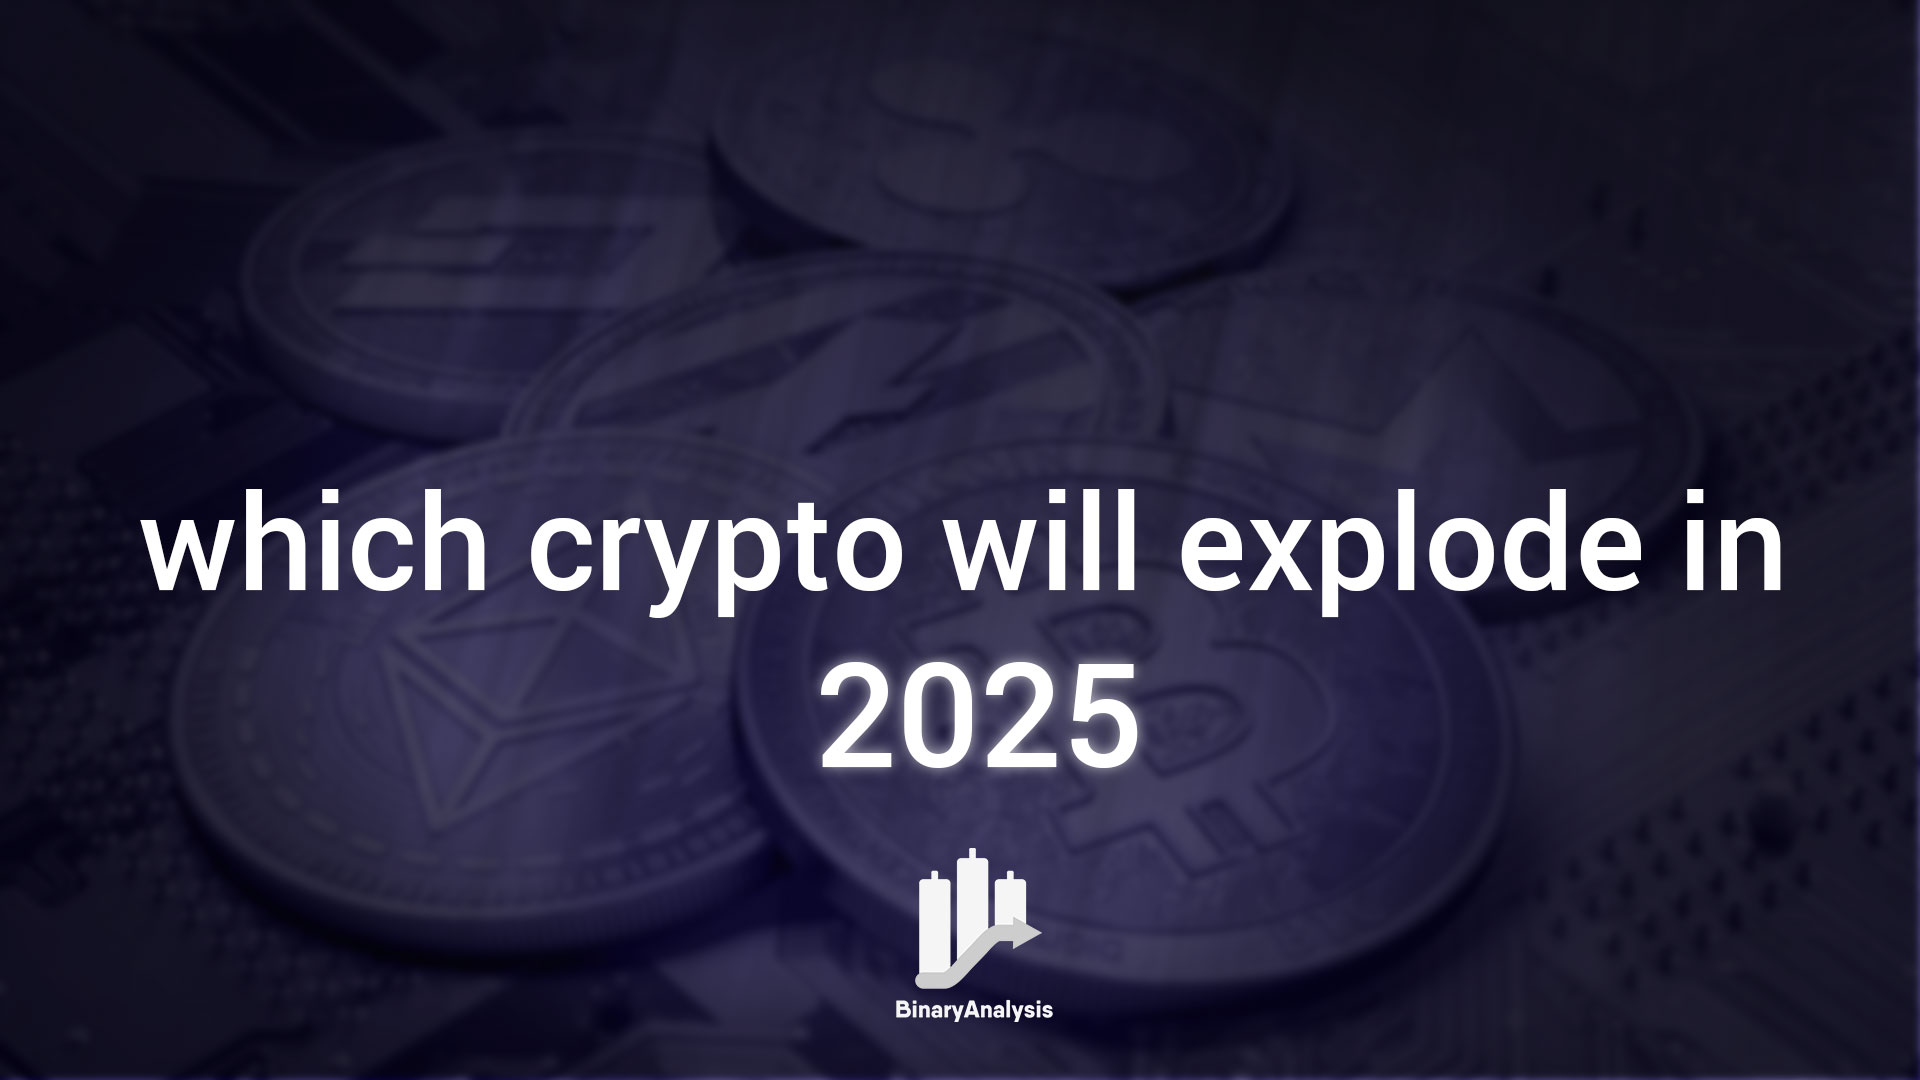  Cryptocurrencies 2025: Which Cryptocurrency Will Rise?